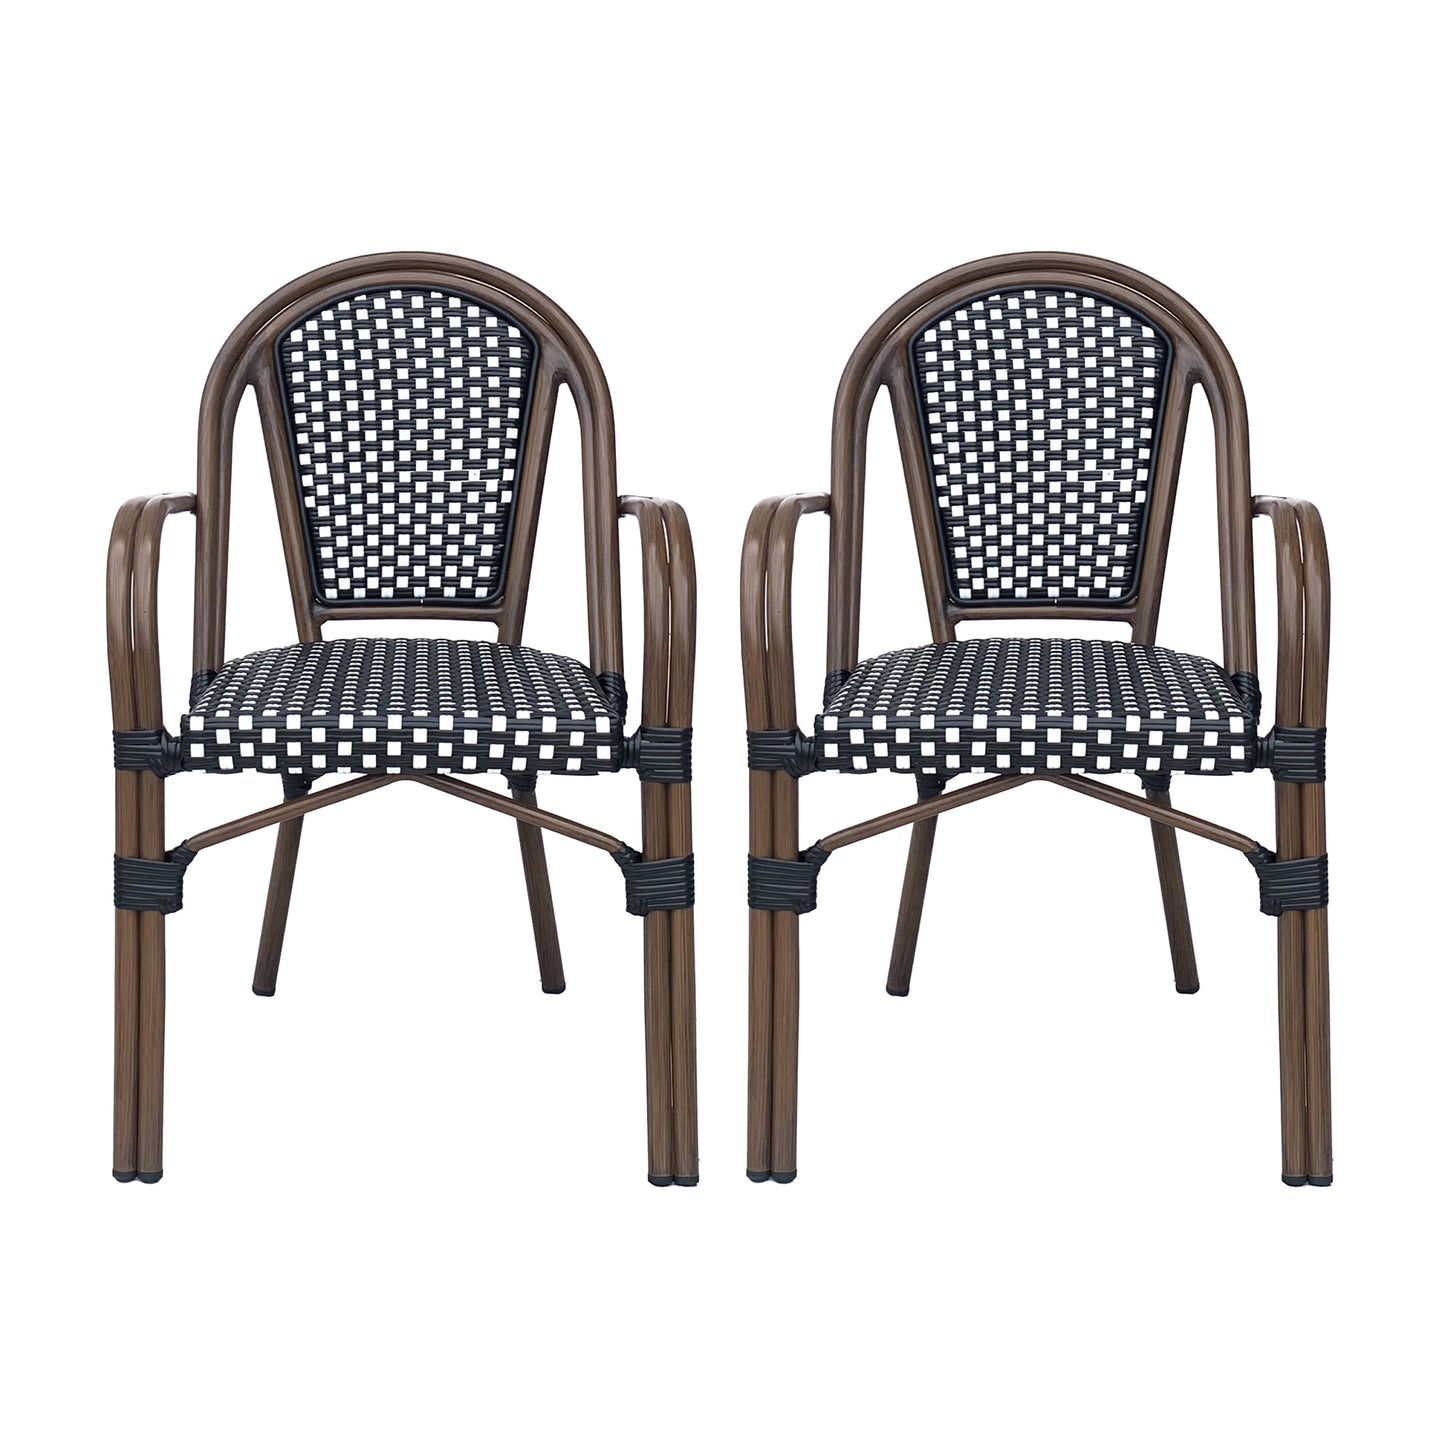 Symonds Outdoor French Bistro Chairs, Set of 2